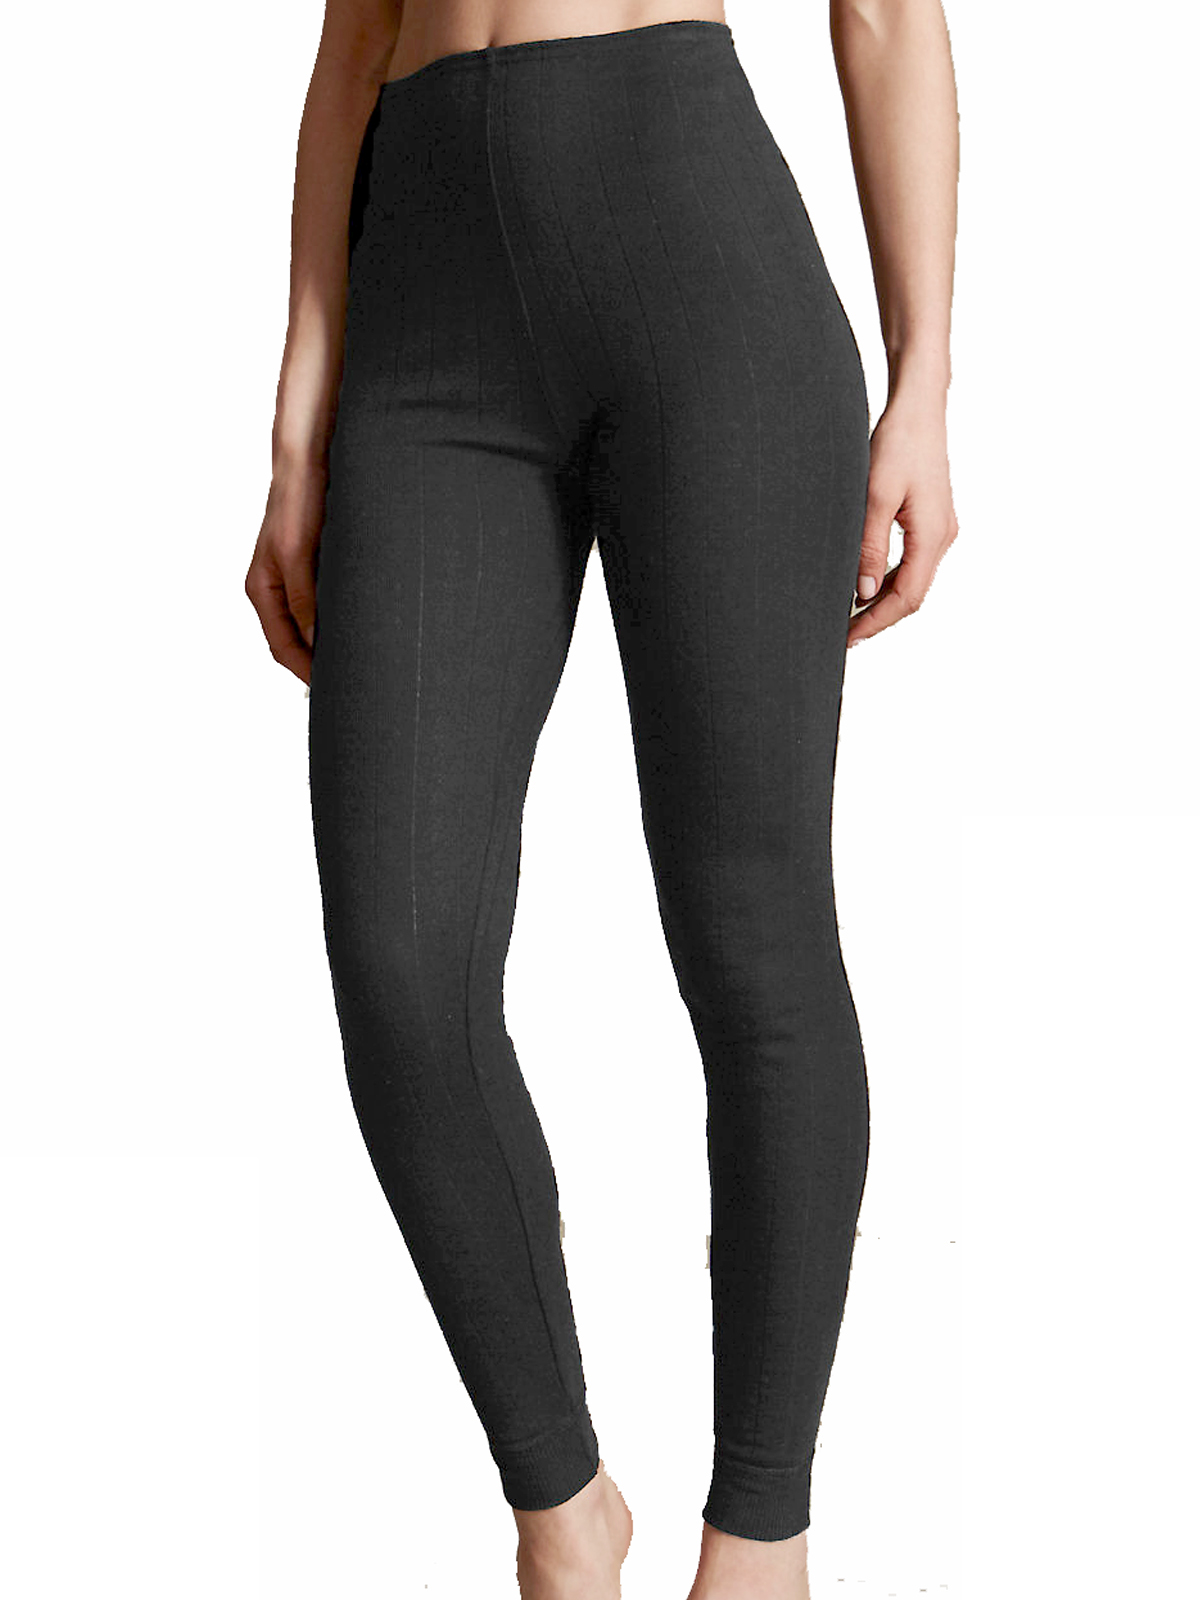 M&S Womens Thermal High Waisted Leggings - 10REG - Brown Mix, Brown  Mix,Black, Compare